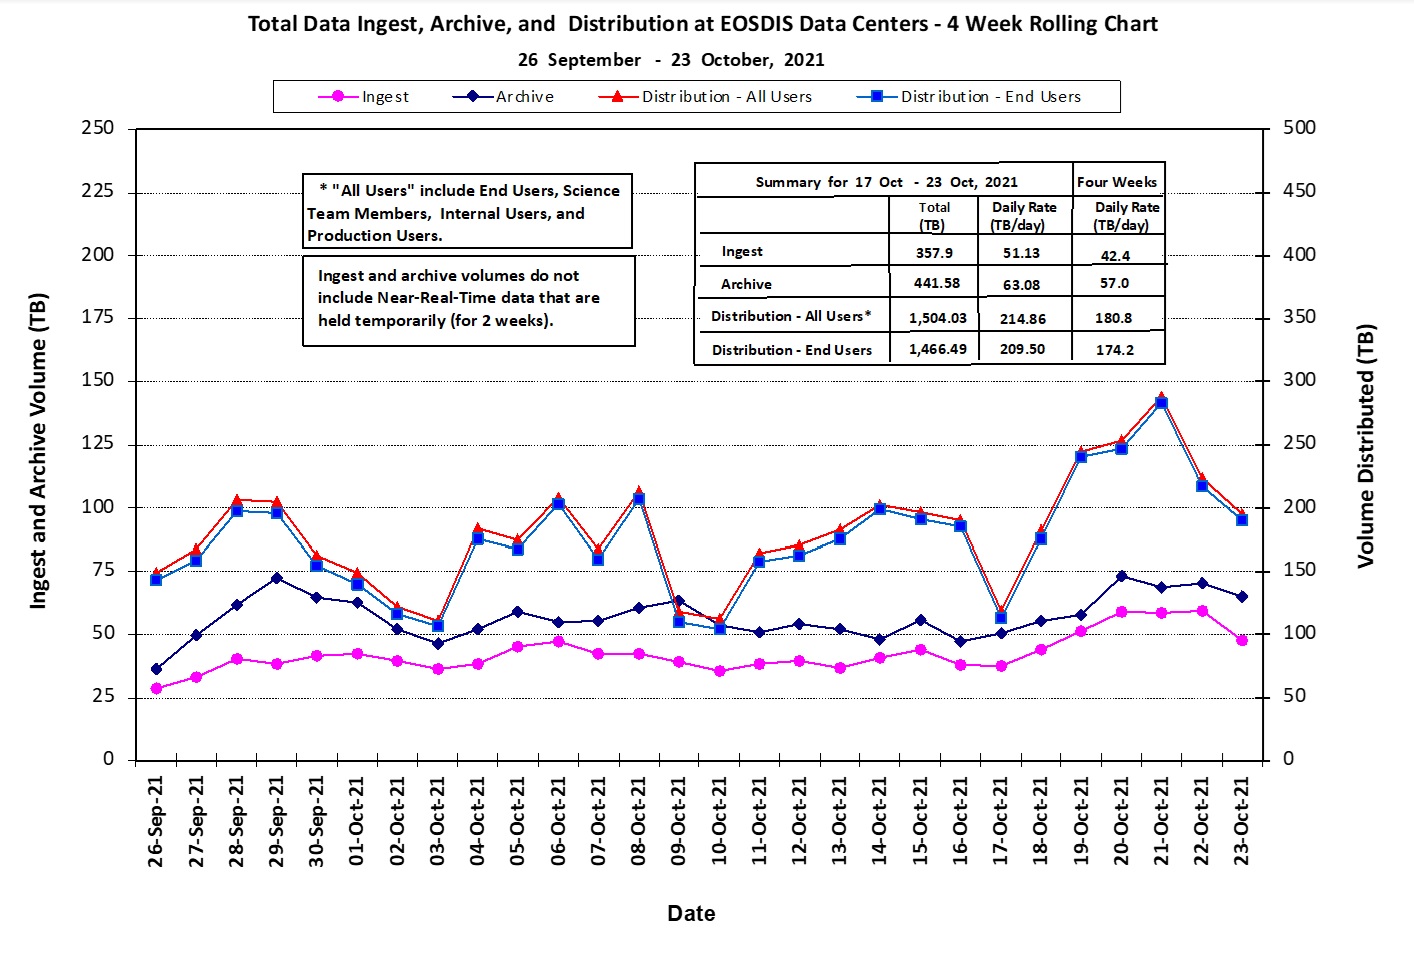 Total data ingest, archive, and distribution at EOSDIS Data Centers, 4-week rolling chart